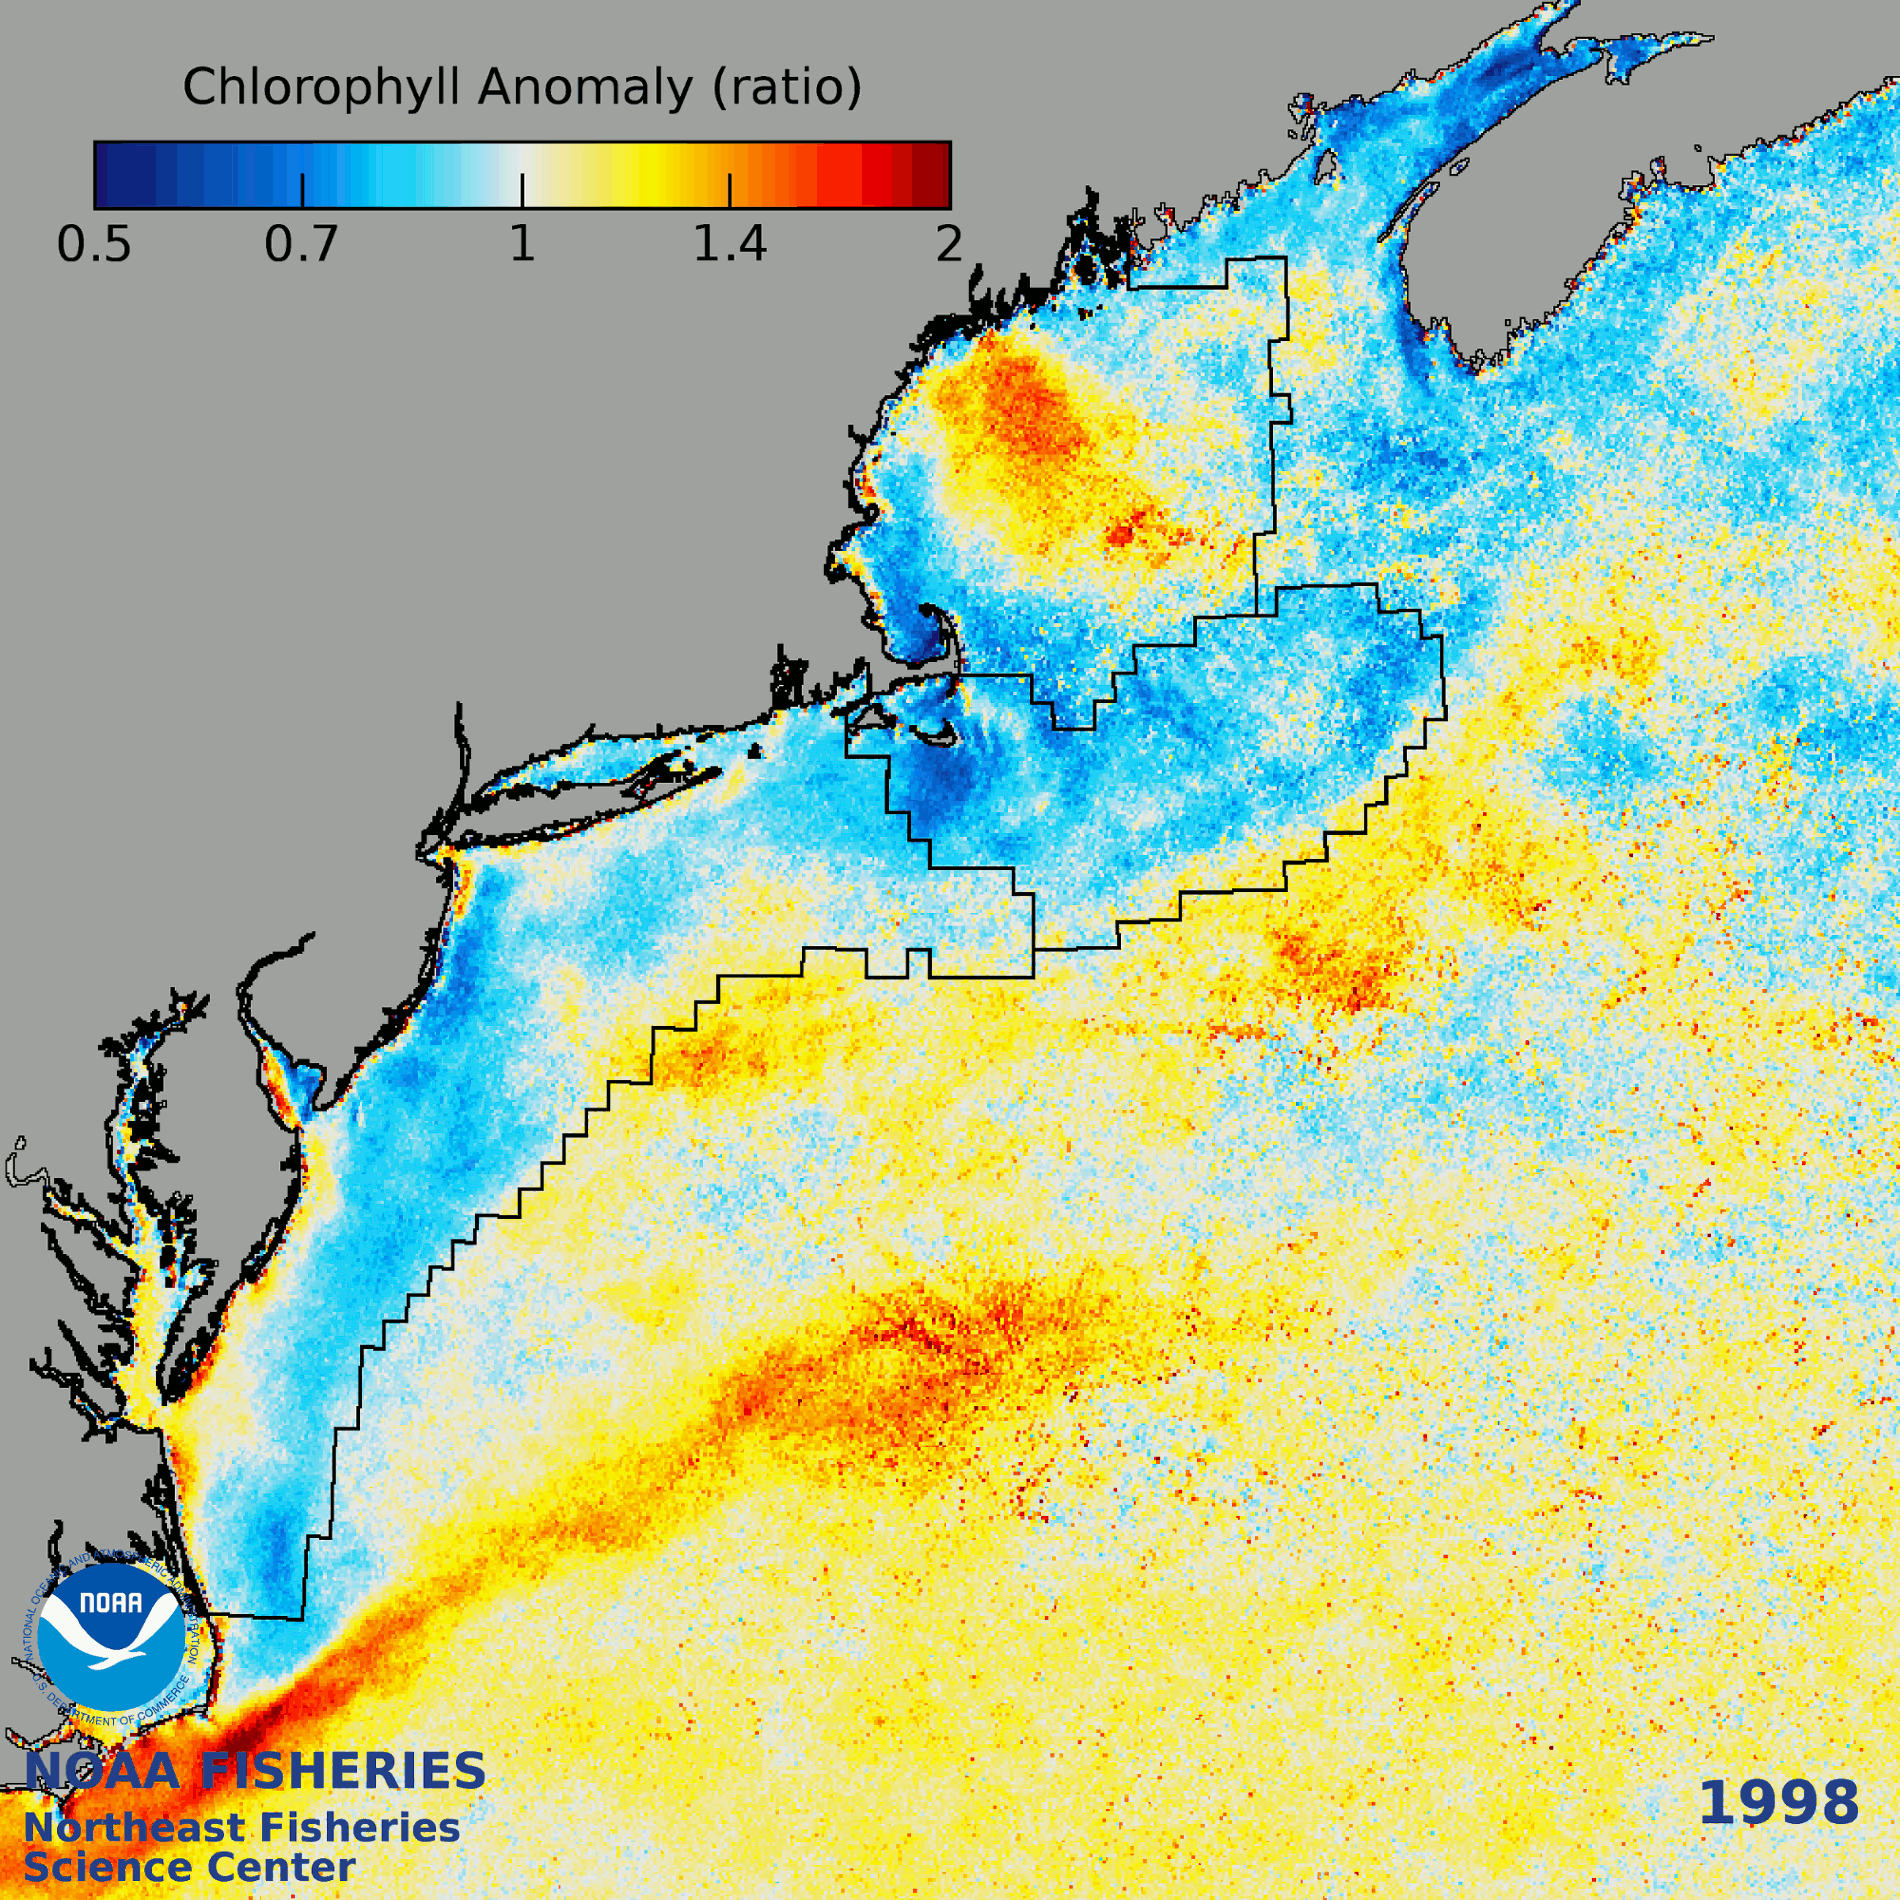 Annual chlorophyll anomalies in the NE-LME